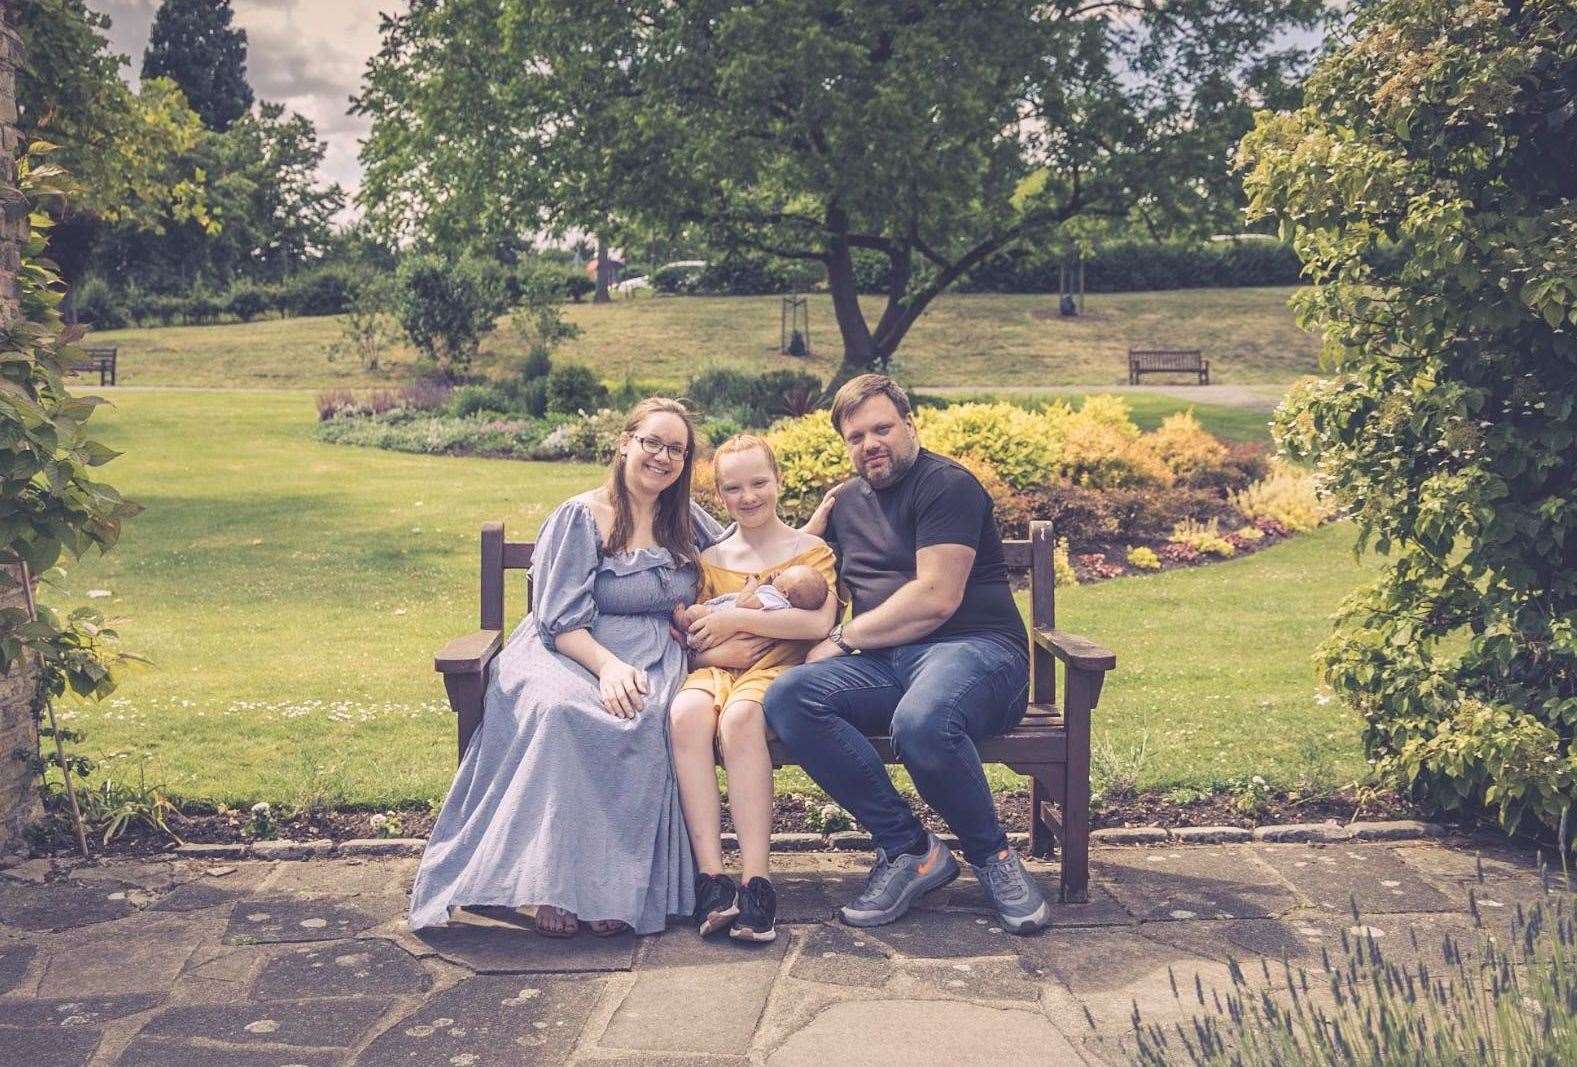 Bethany Granger, with husband Luke, step-daughter Jessica, 11, and son Max, 8 months, pictured at Danson park, which is within the new ULEZ boundaries coming into force in August